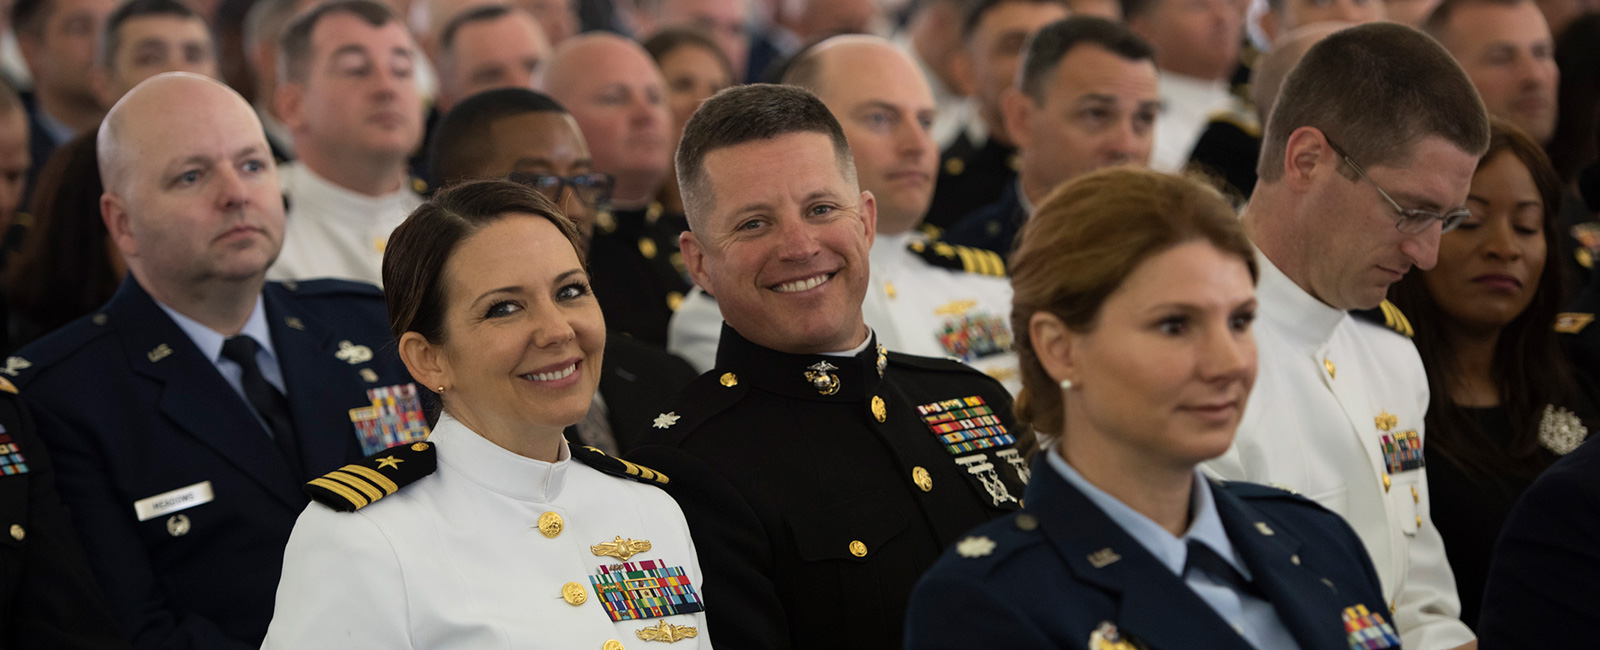 U.S. Naval War College hosted its 2019 commencement ceremony on Dewey Field in Newport, R.I., June 14.